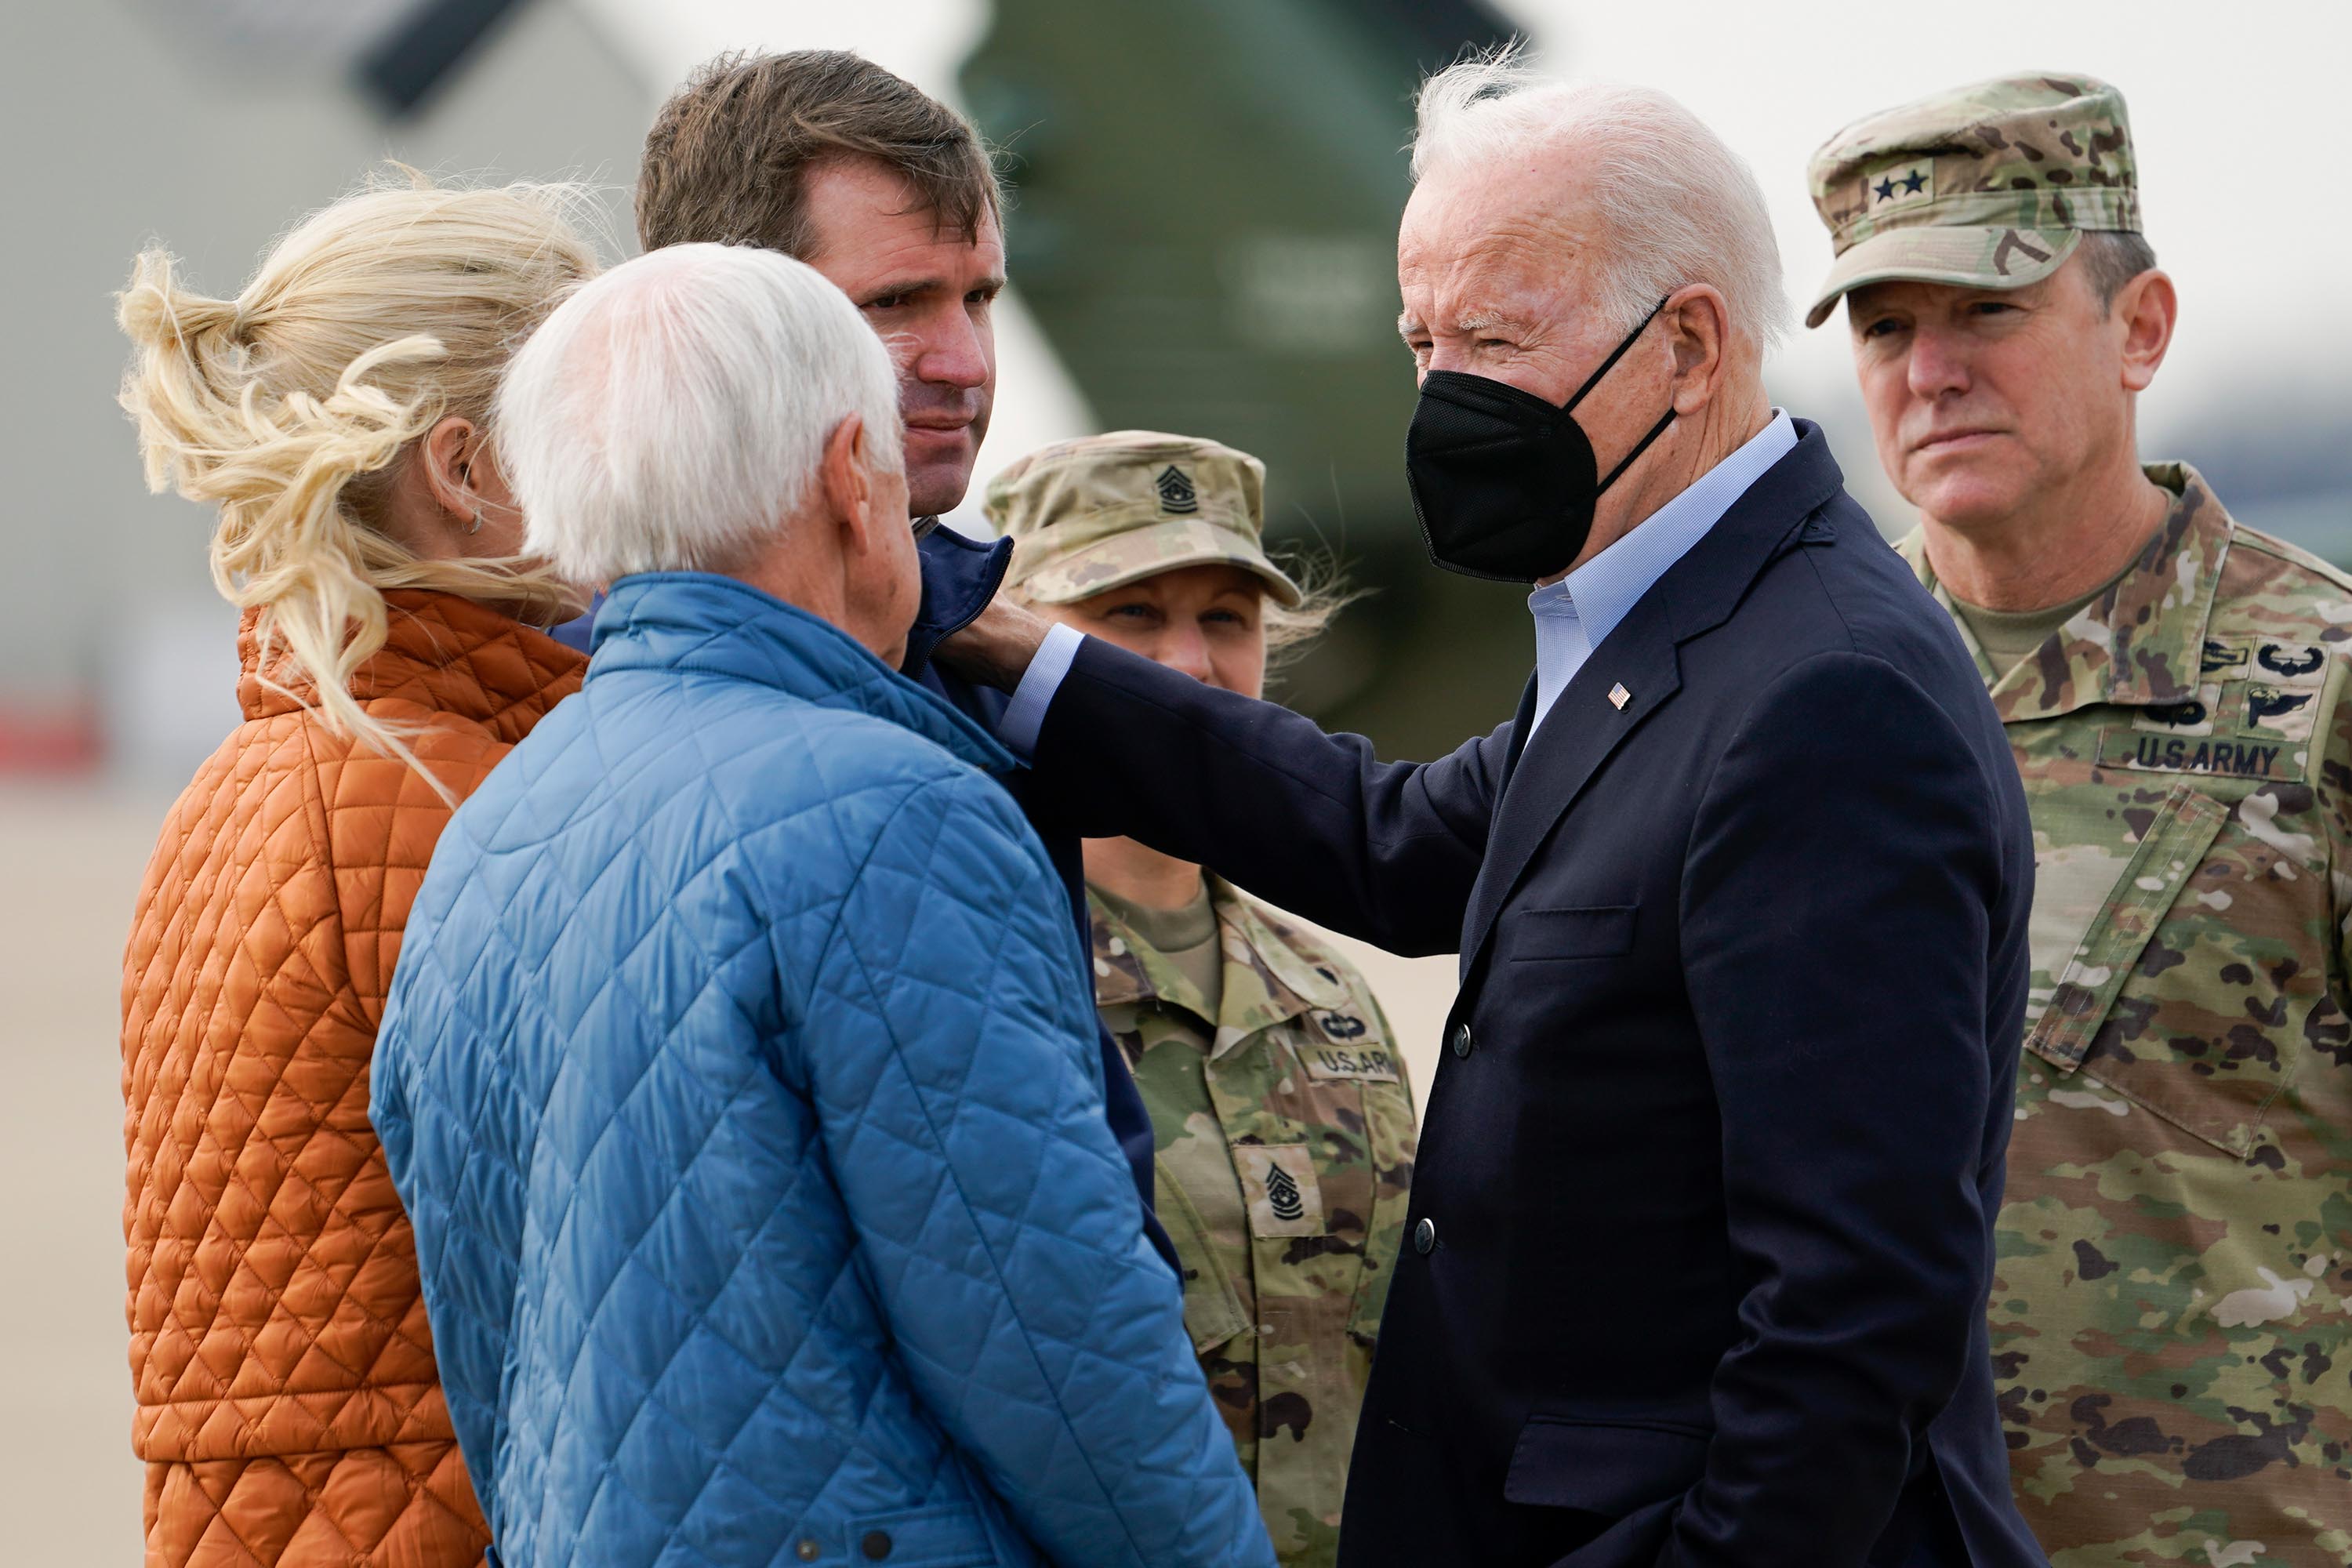 President Joe Biden greets Kentucky Gov. Andy Beshear and his wife Britainy Beshear, left, and former Gov. Steve Beshear, second from left, as he arrives in Fort Campbell, Kentucky, on December 15 to survey storm damage from tornadoes and extreme weather.